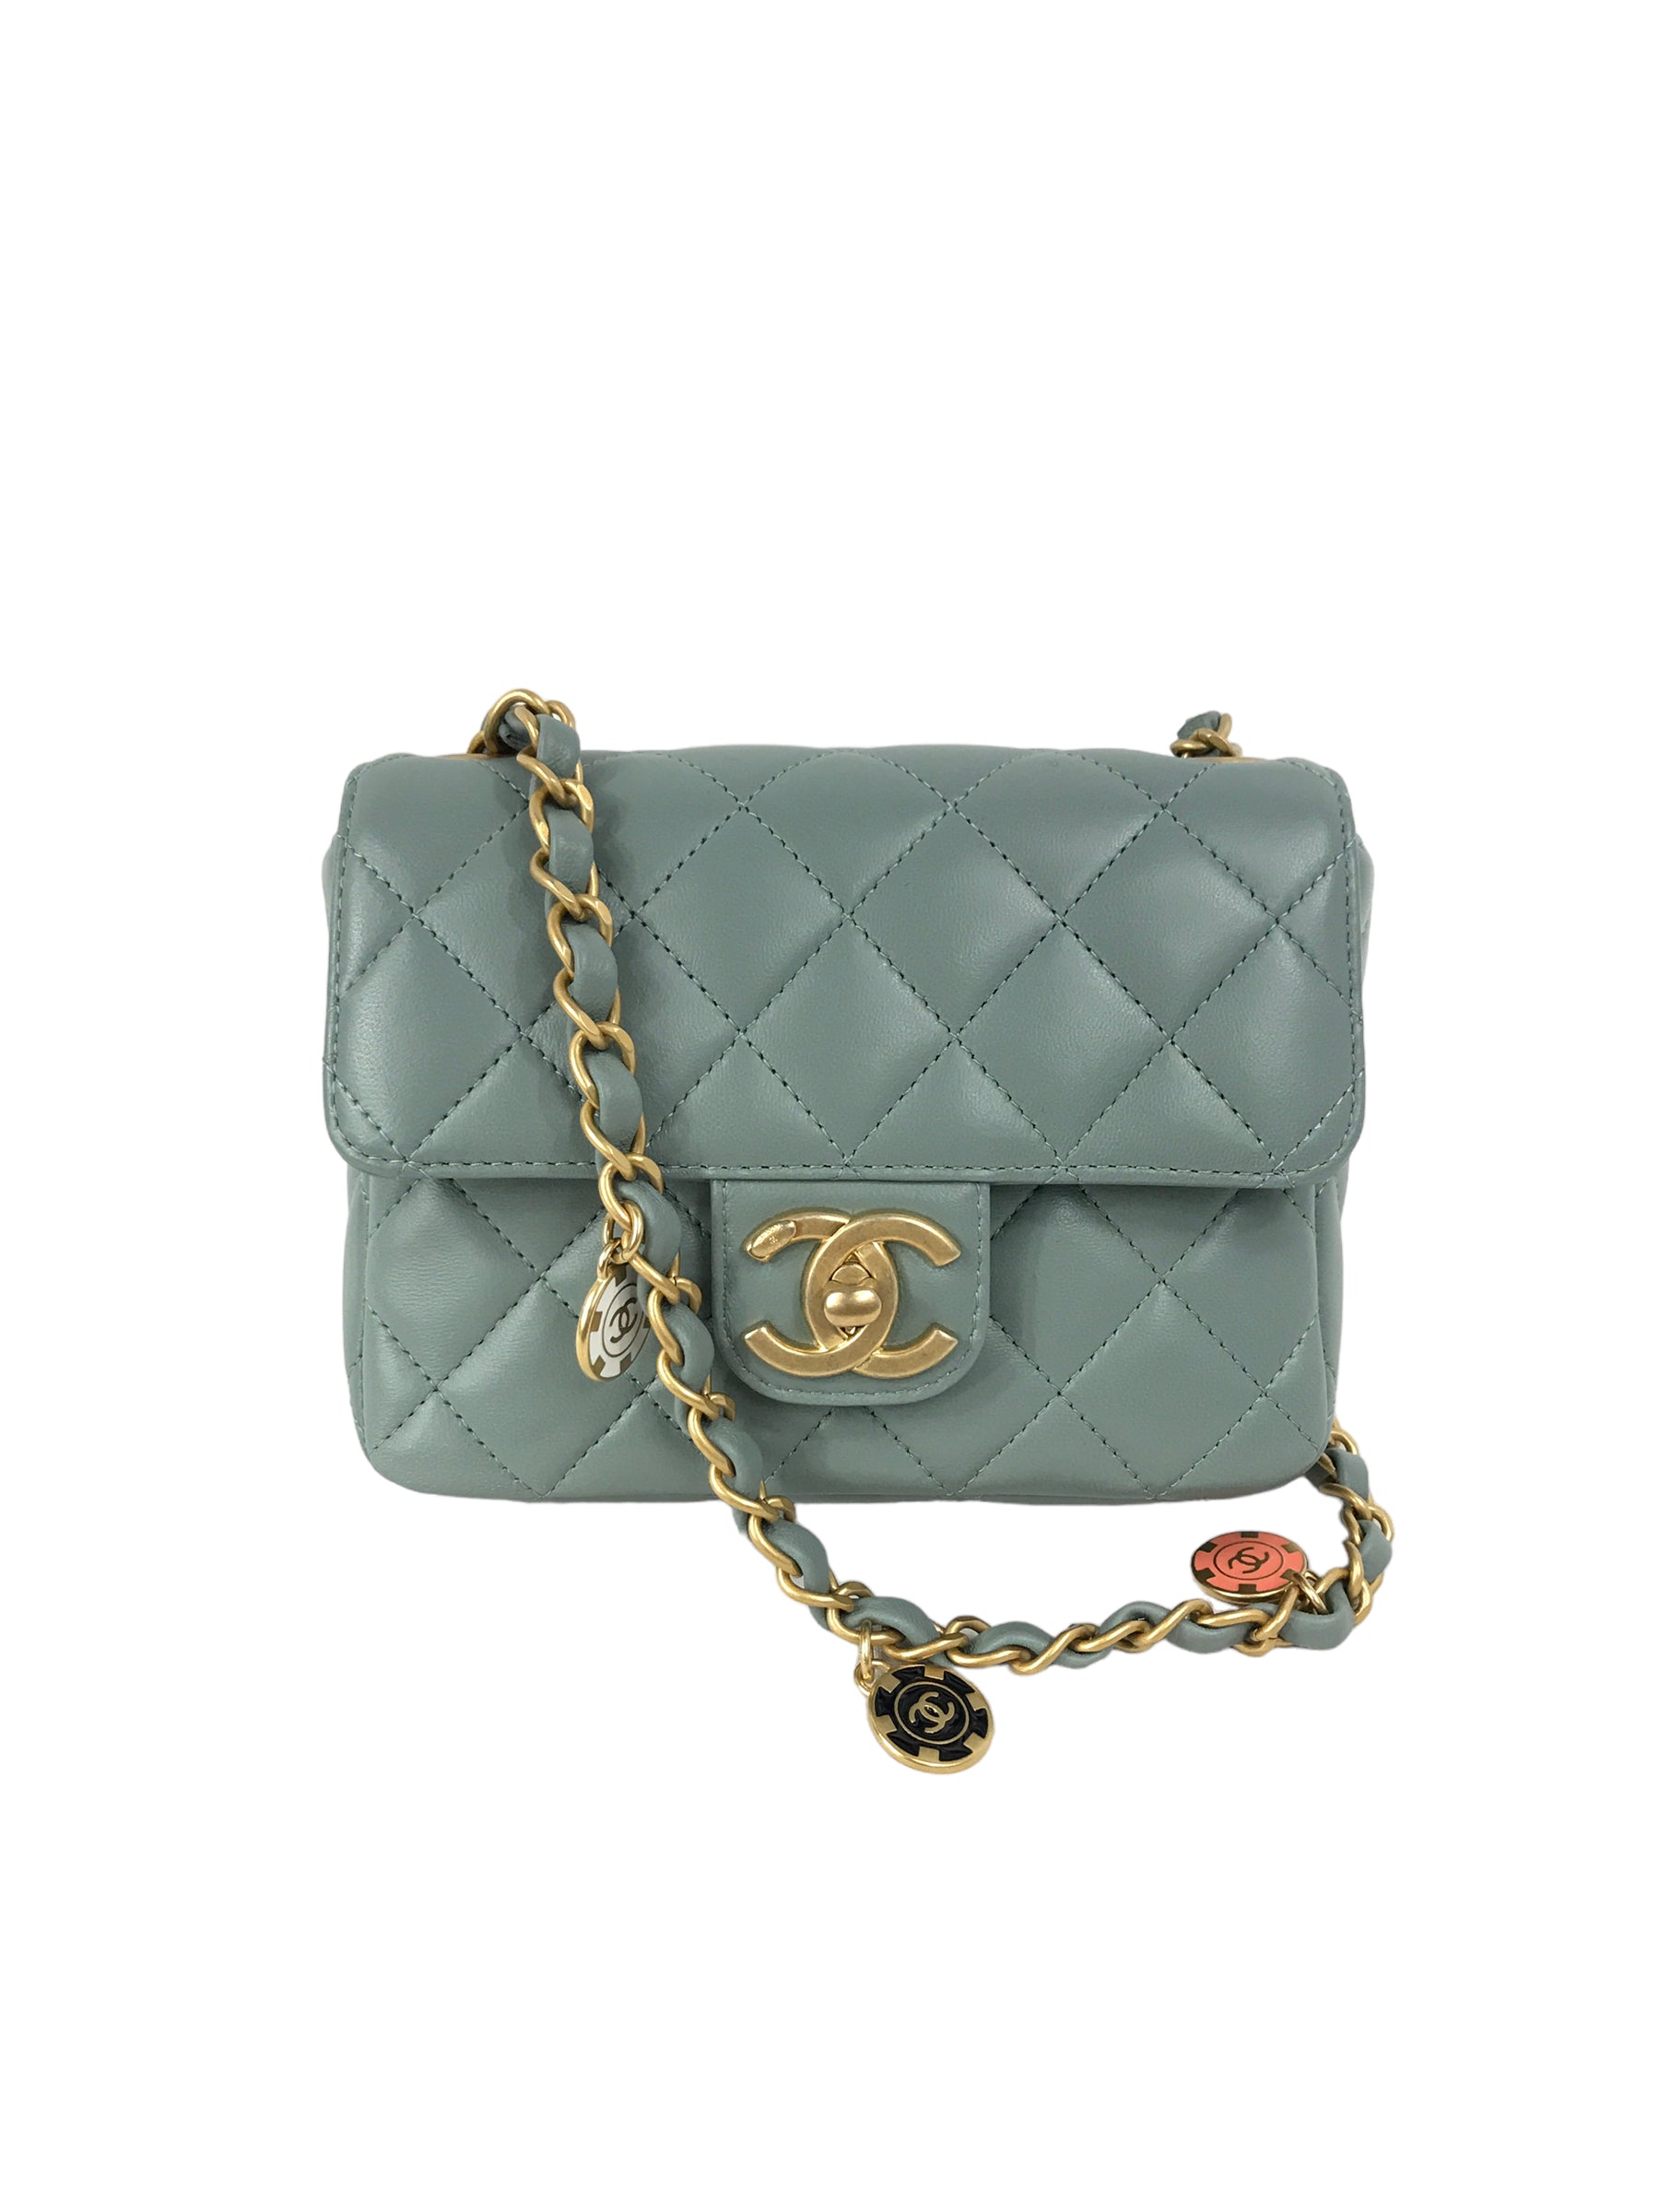 Chanel Light Grey/Blue Quilted Lambskin Mini Cruise Square Flap Bag w/